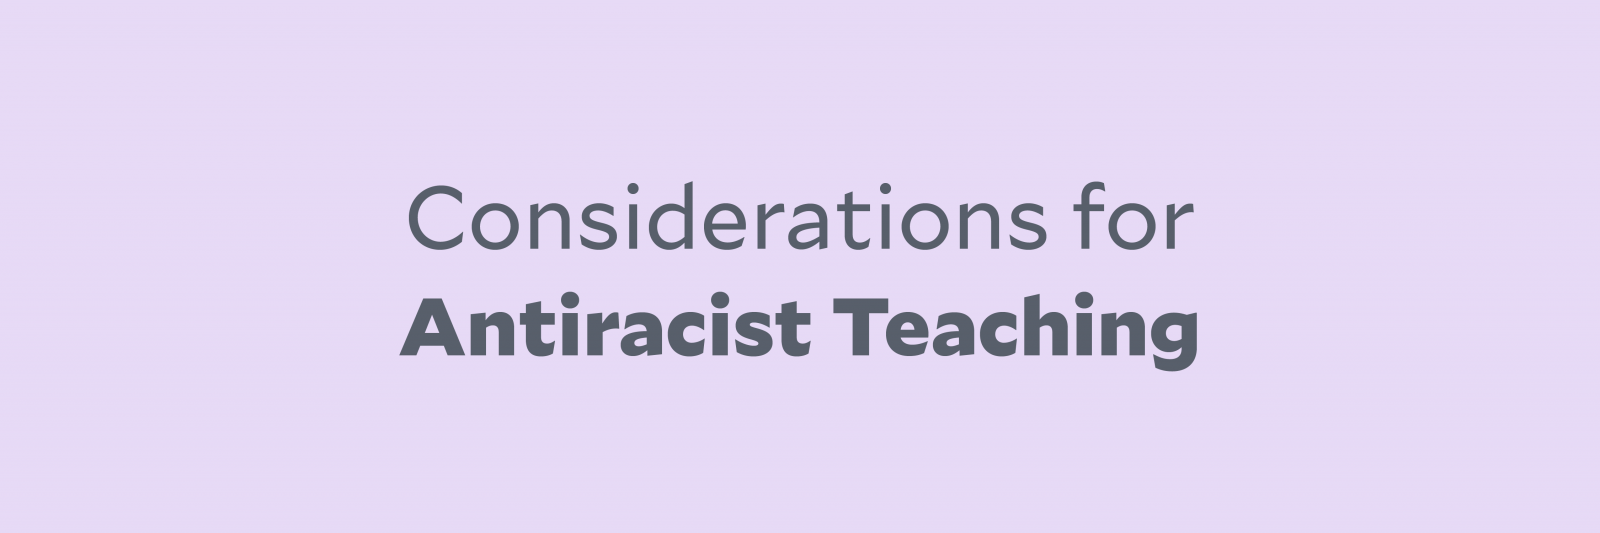 Considerations for Antiracist Teaching